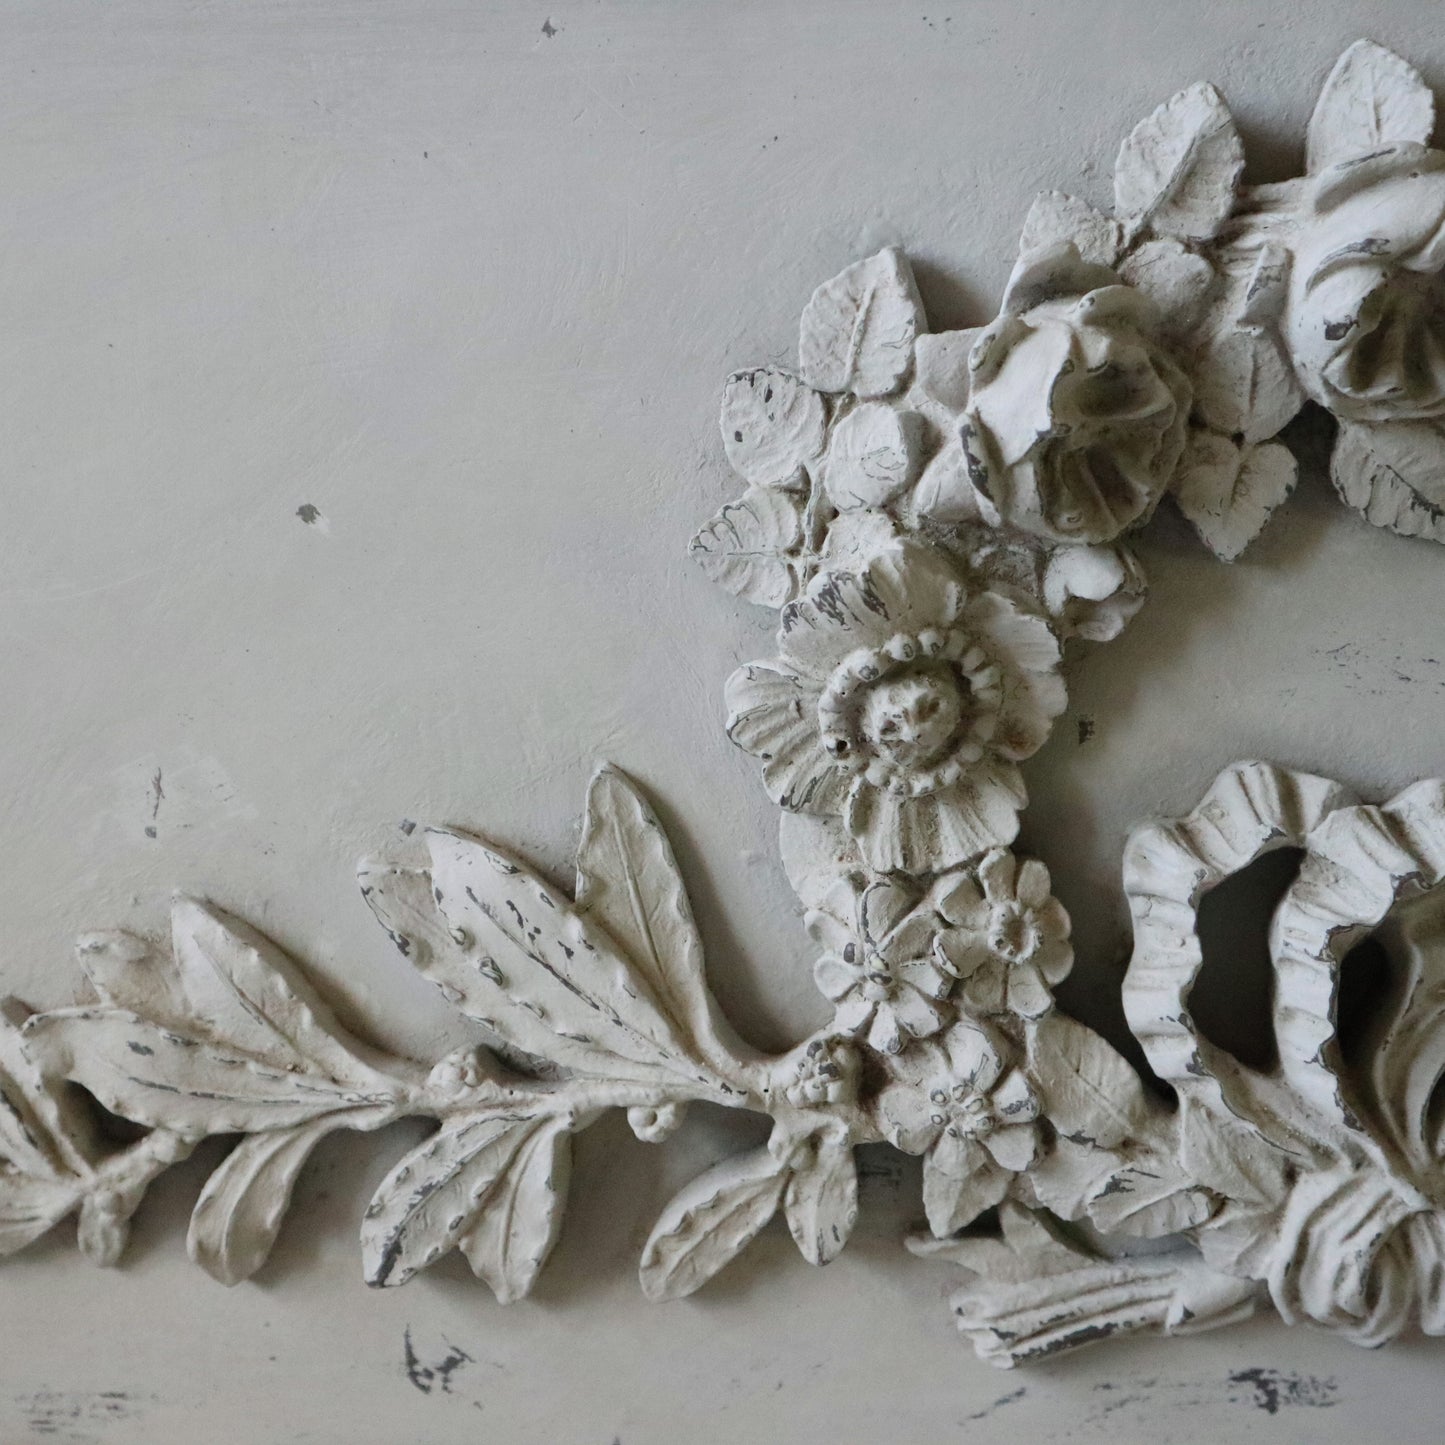 Reproduction French Floral Garland Pediment